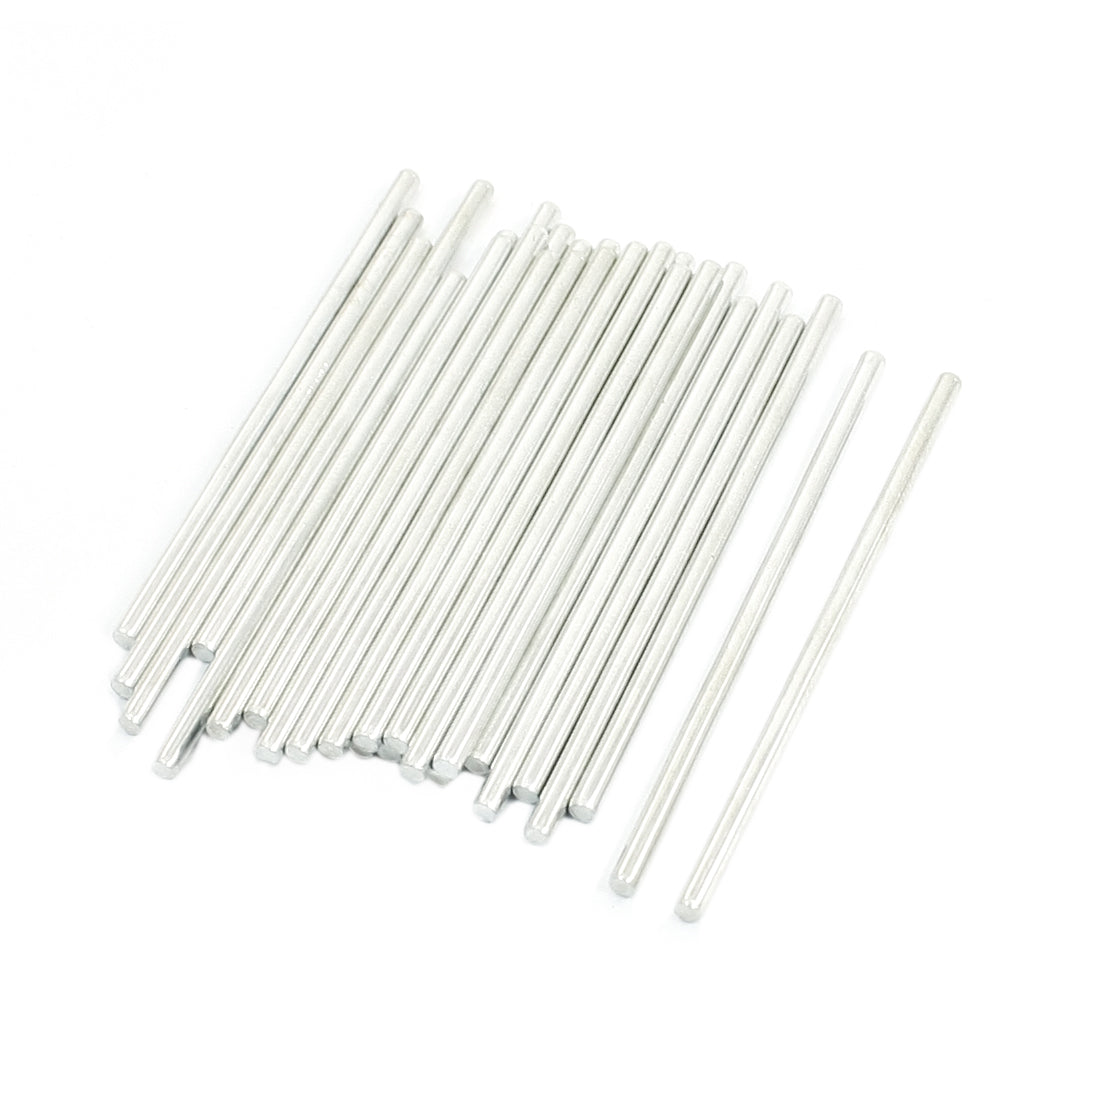 uxcell Uxcell 30 Pcs RC Helicopter Model Part Stainless Steel Round Rods Axles 30mm x 2mm